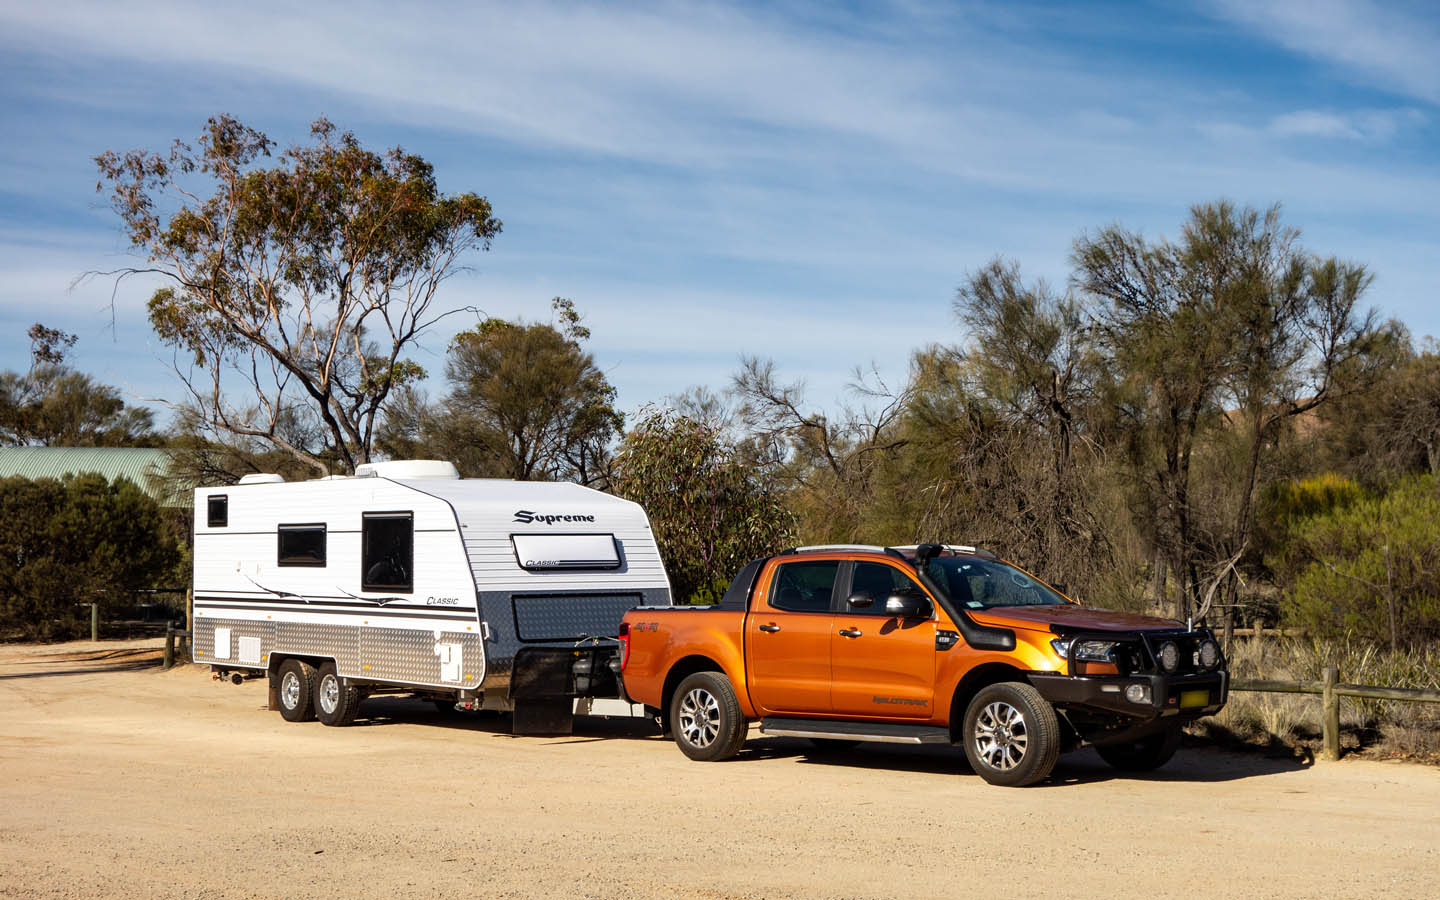 towing capacity: truck towing trailer